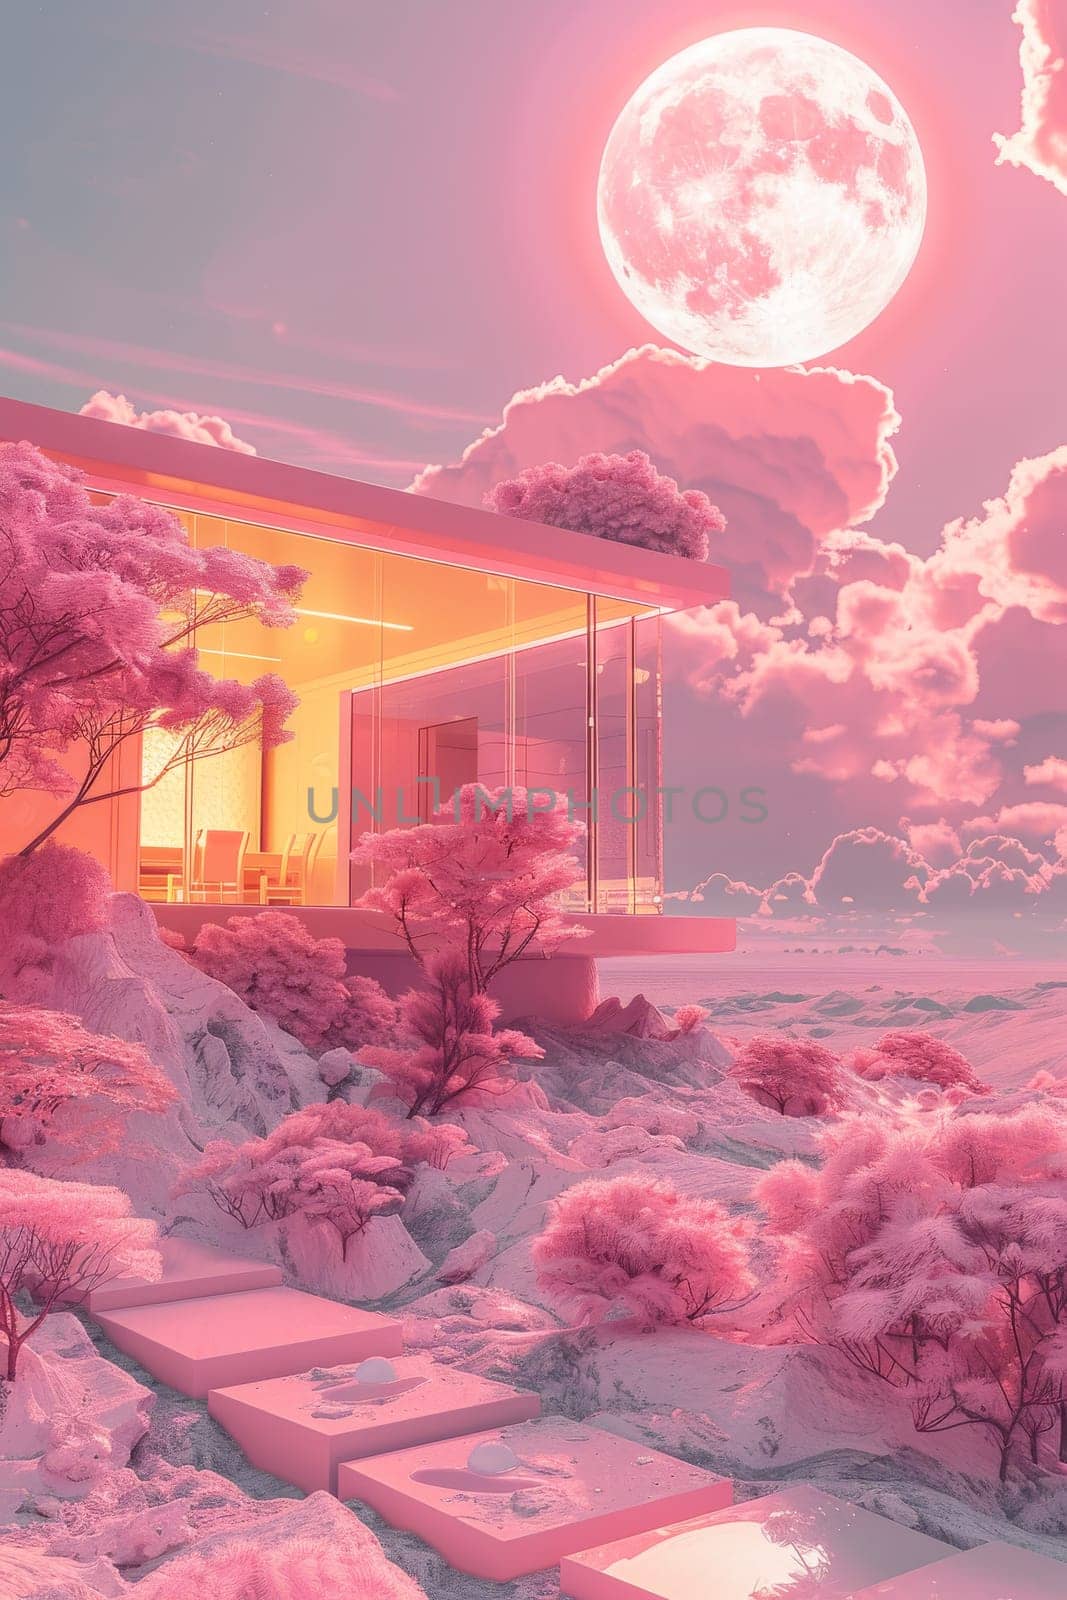 A house with a pink moon in the sky. The house is surrounded by trees and there is a path leading to it